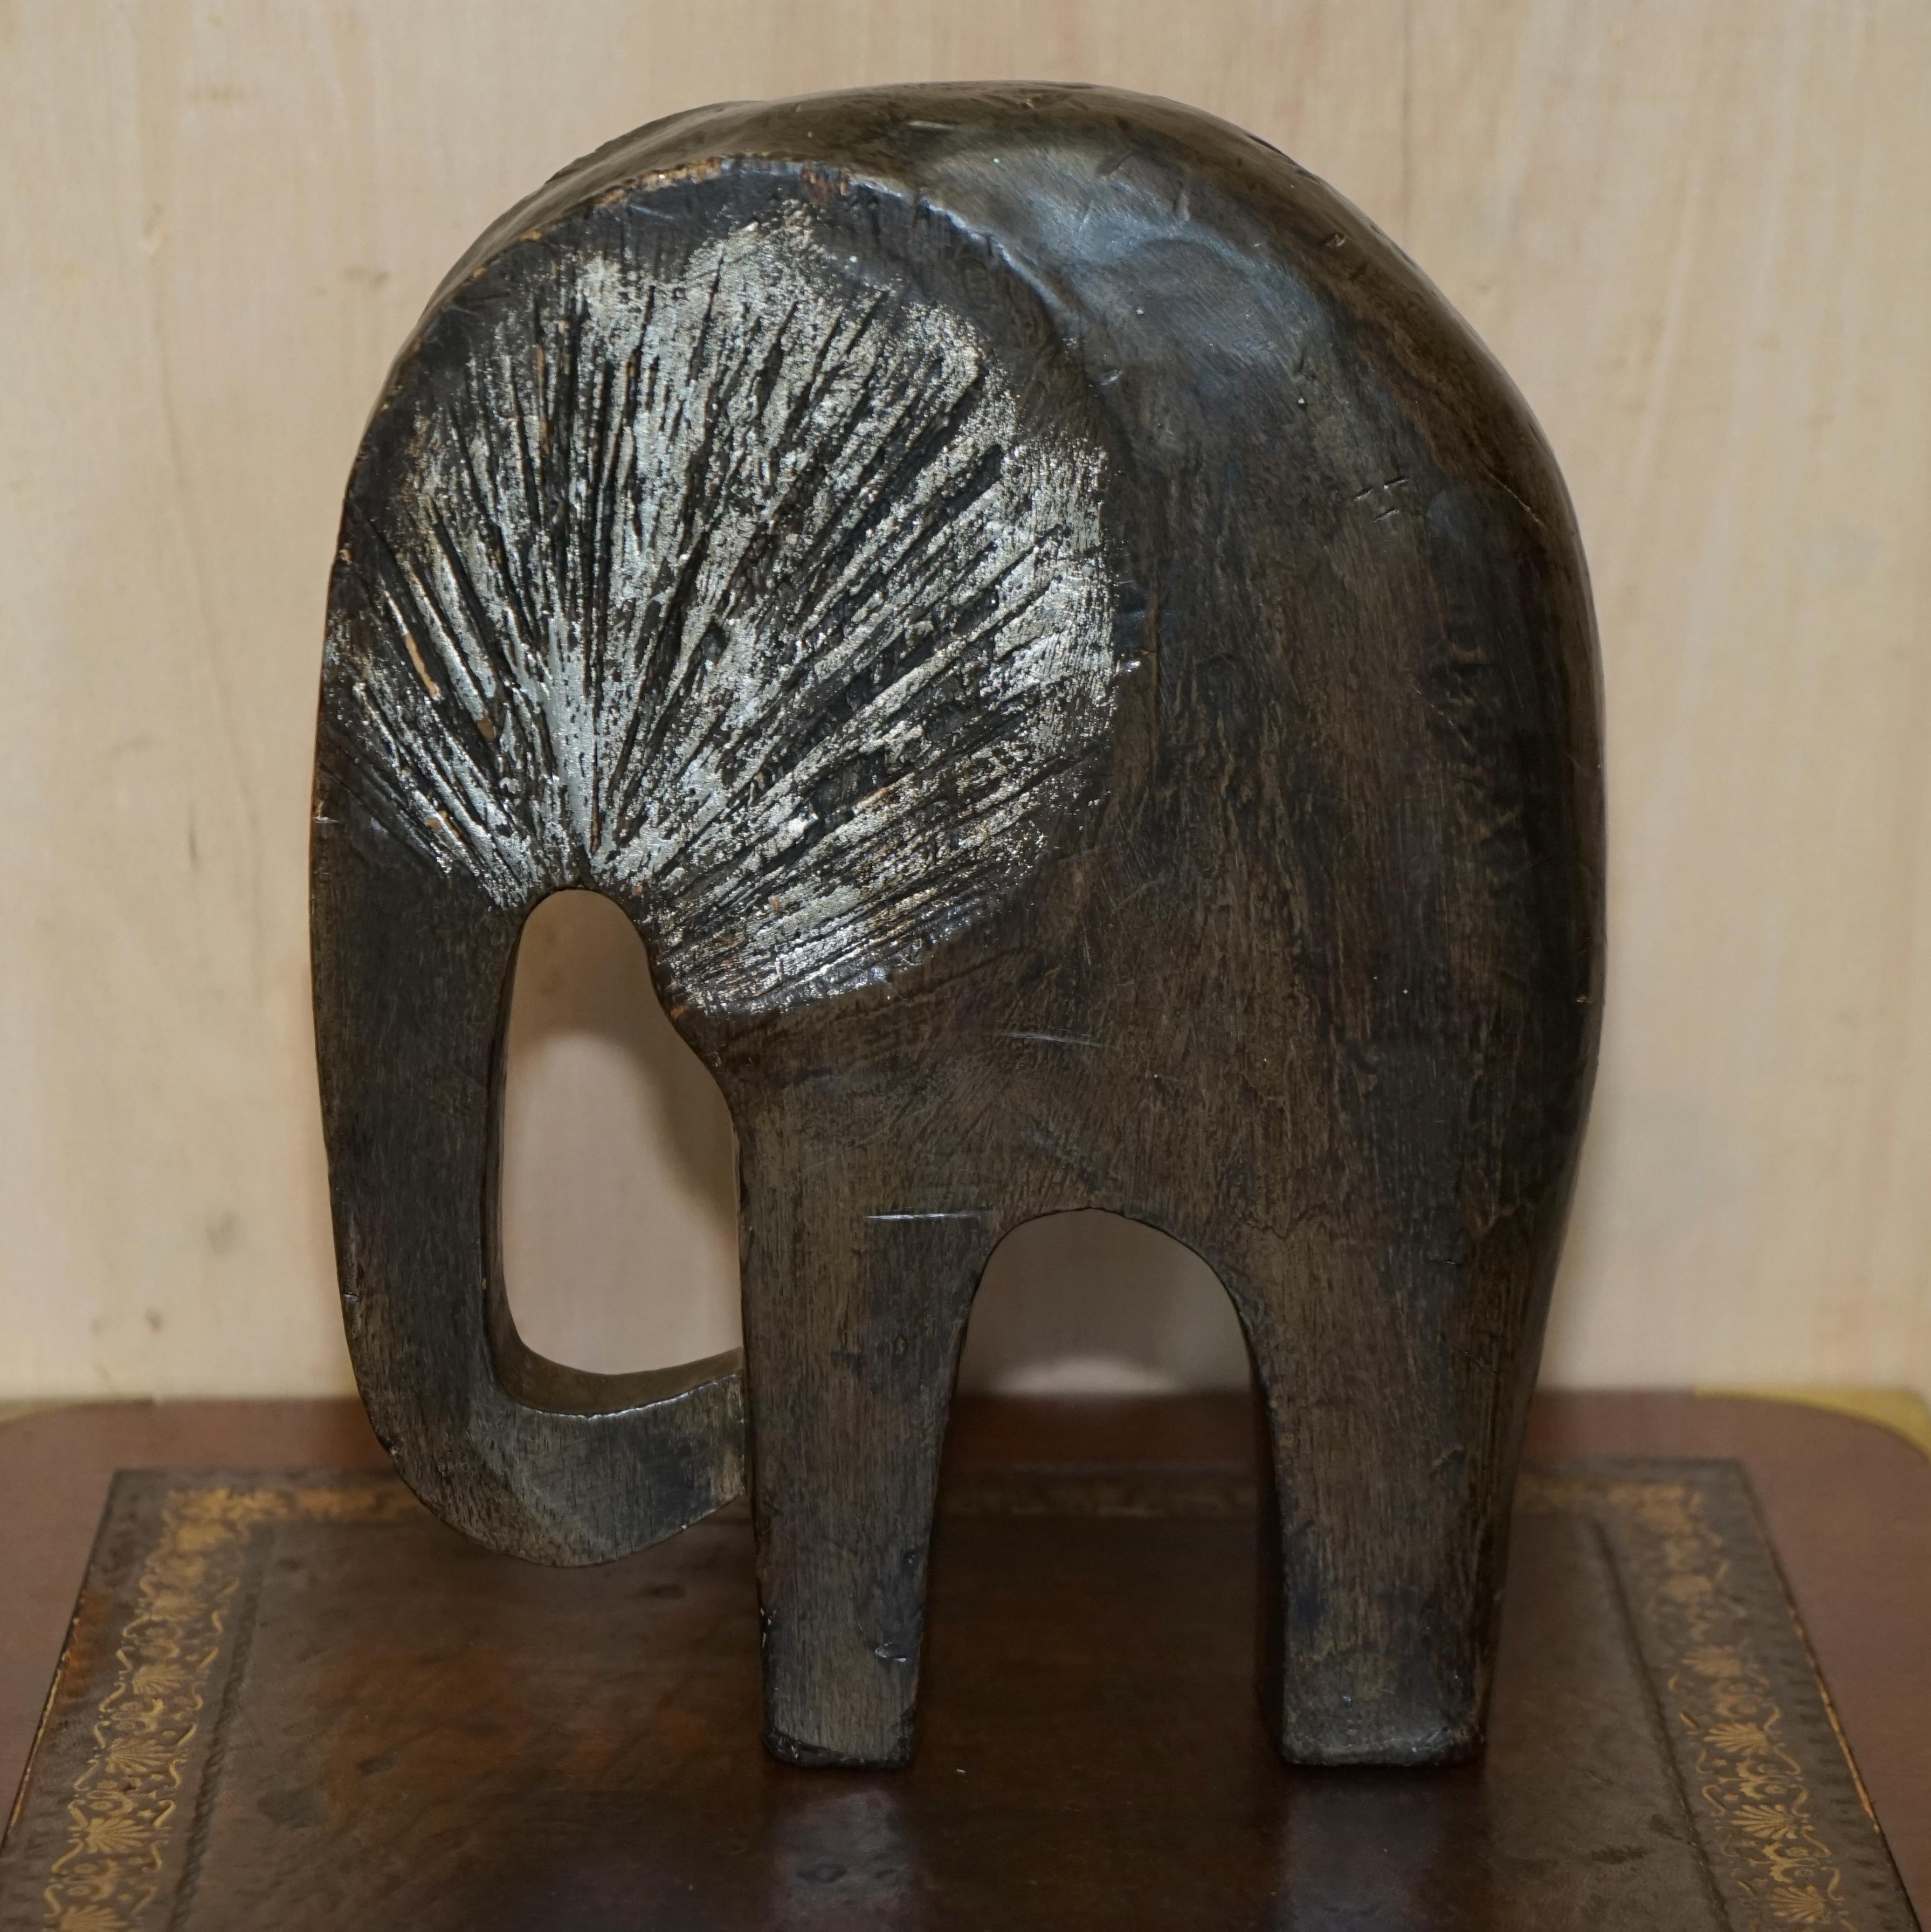 Pair of Vintage Hand Carved Elephant Statues in the Modernist Style and Form 3